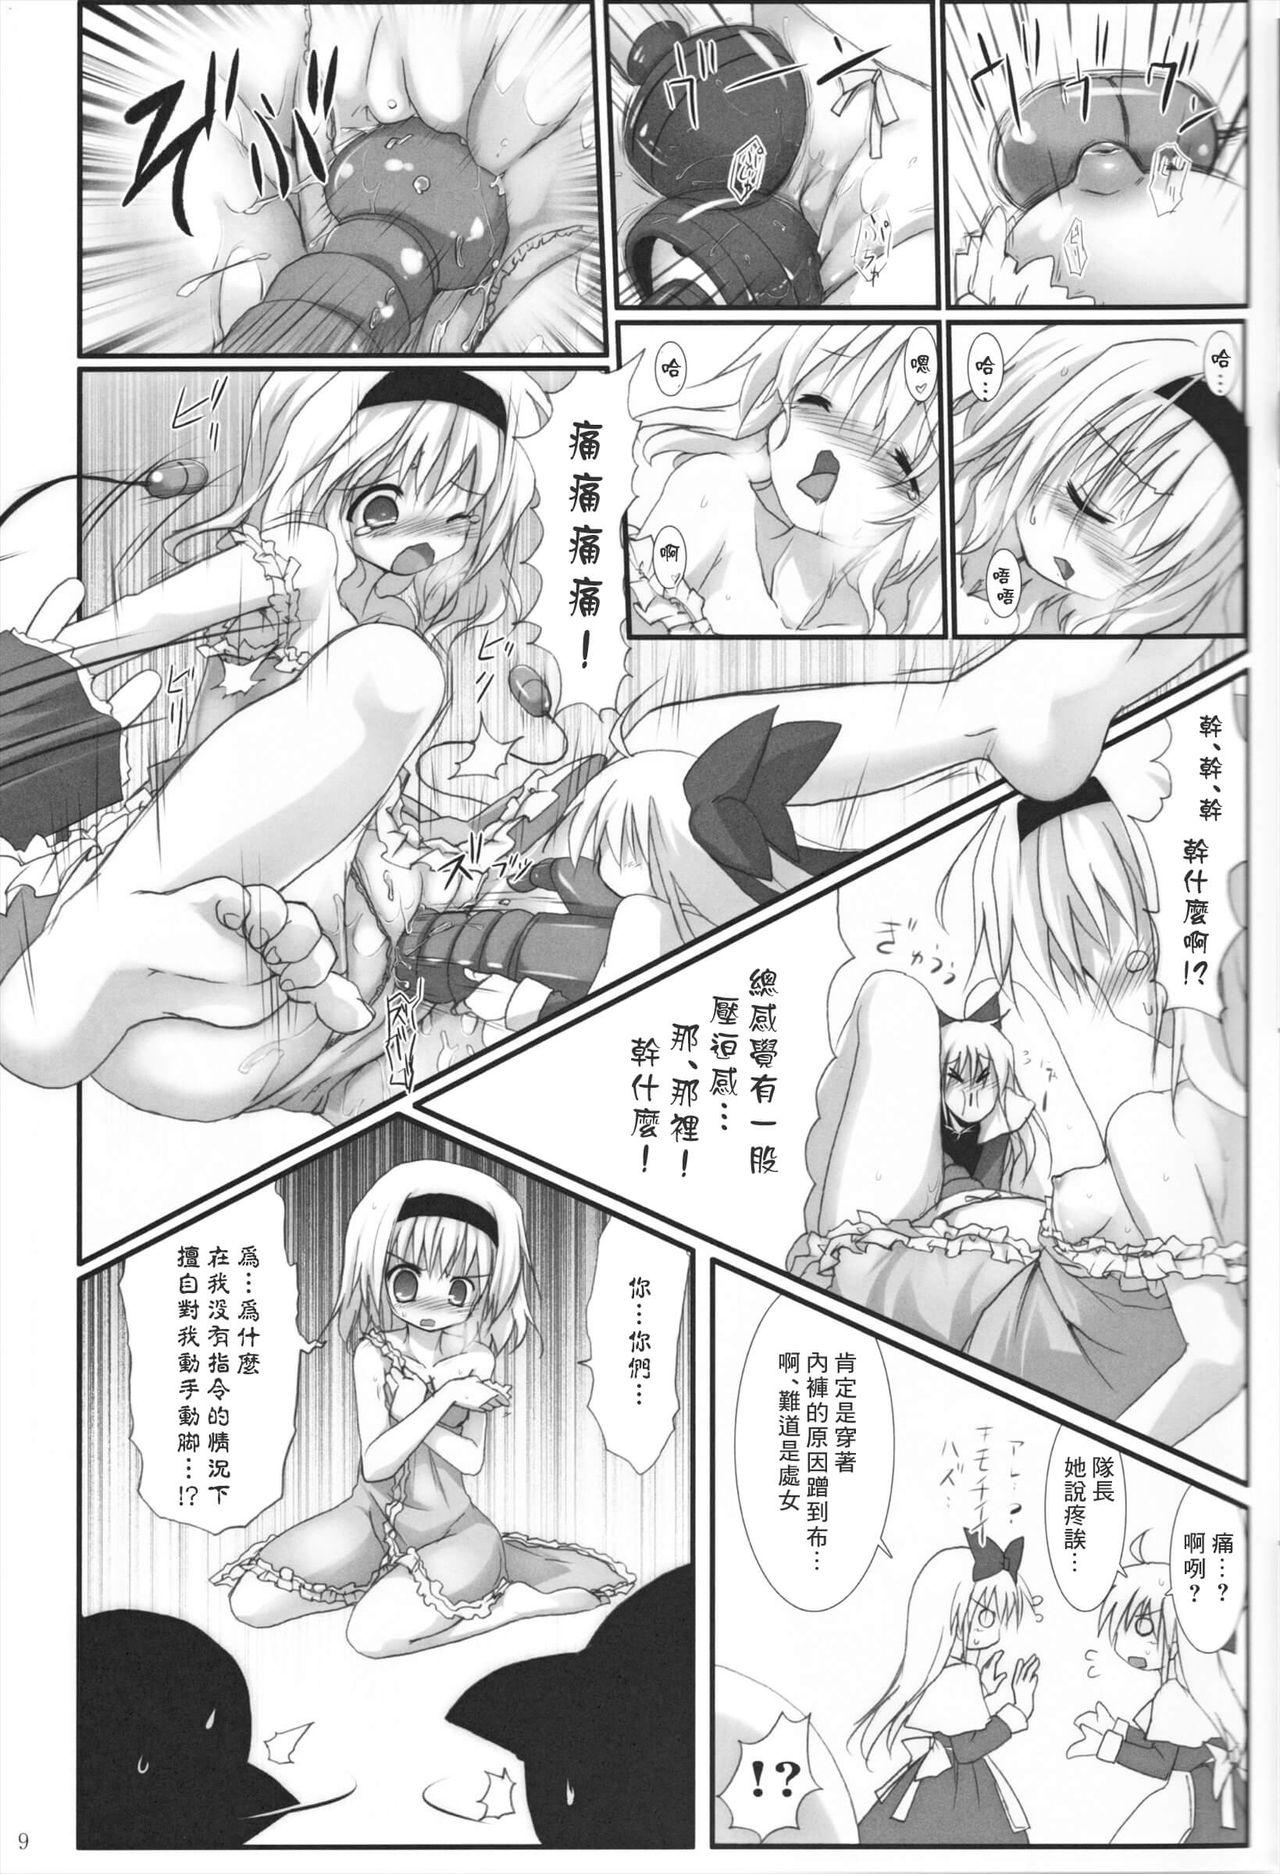 Amigos Alice in Nightmare - Touhou project Celebrity Sex Scene - Page 10